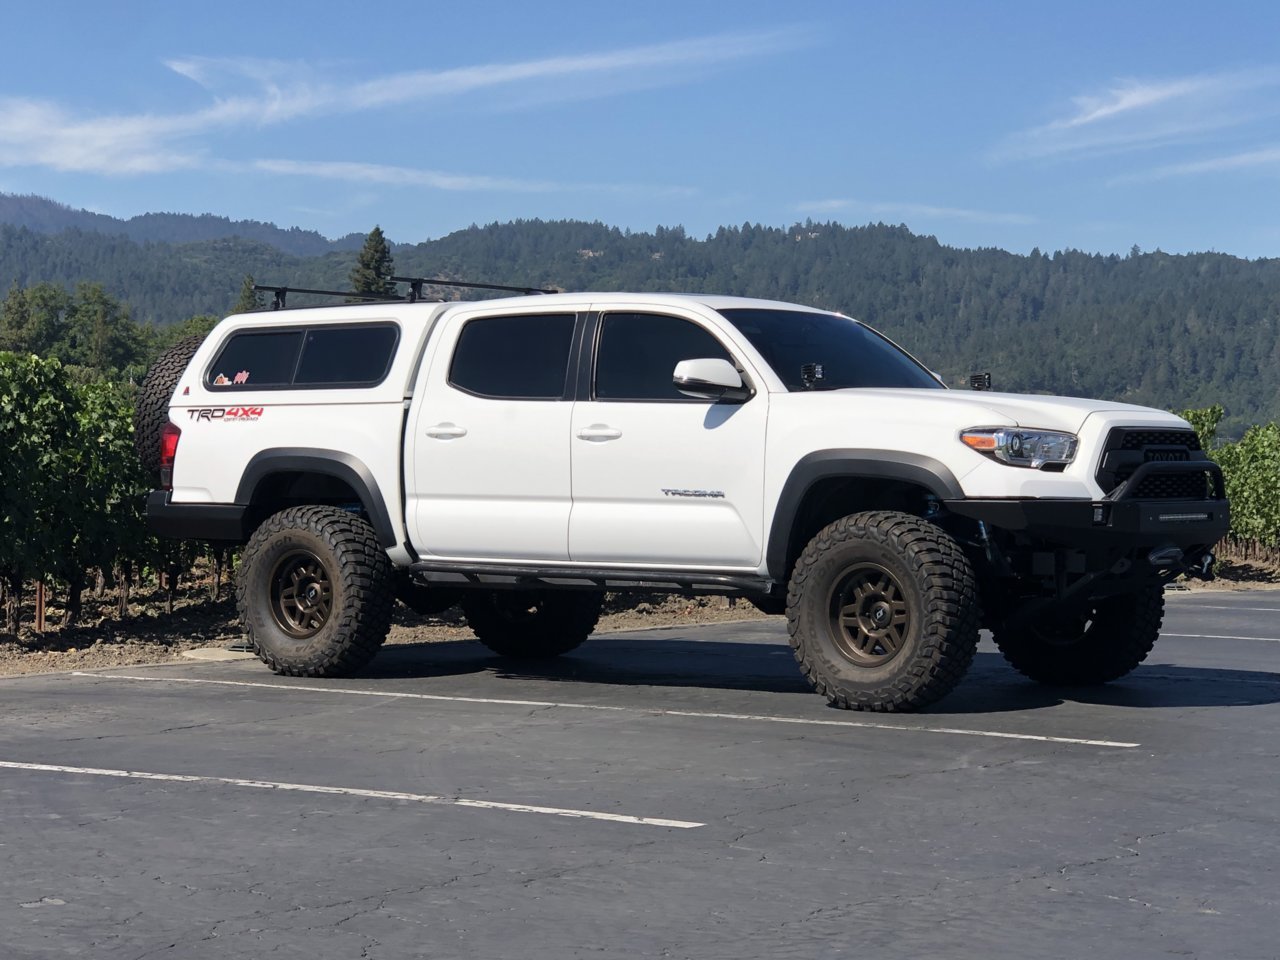 SOLD SOLD TO THE BAKER. 2017 TRD Offroad 41,000 obo | Tacoma World